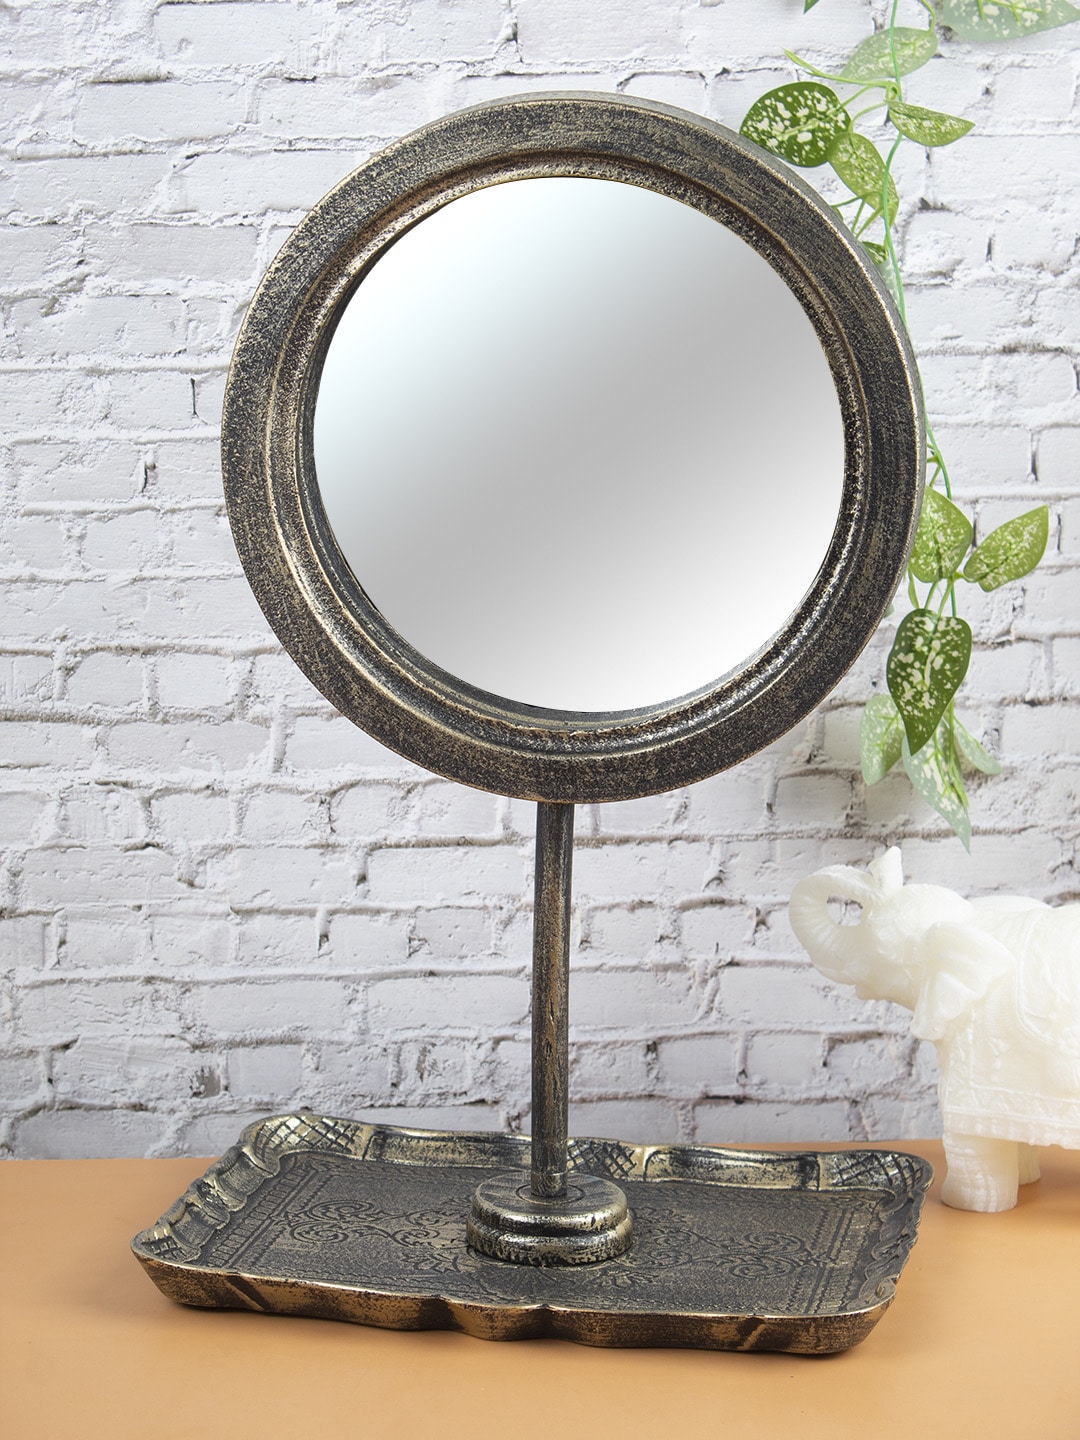 MARKET99 Brown Solid Wooden Handmade Table Top Mirror Price in India